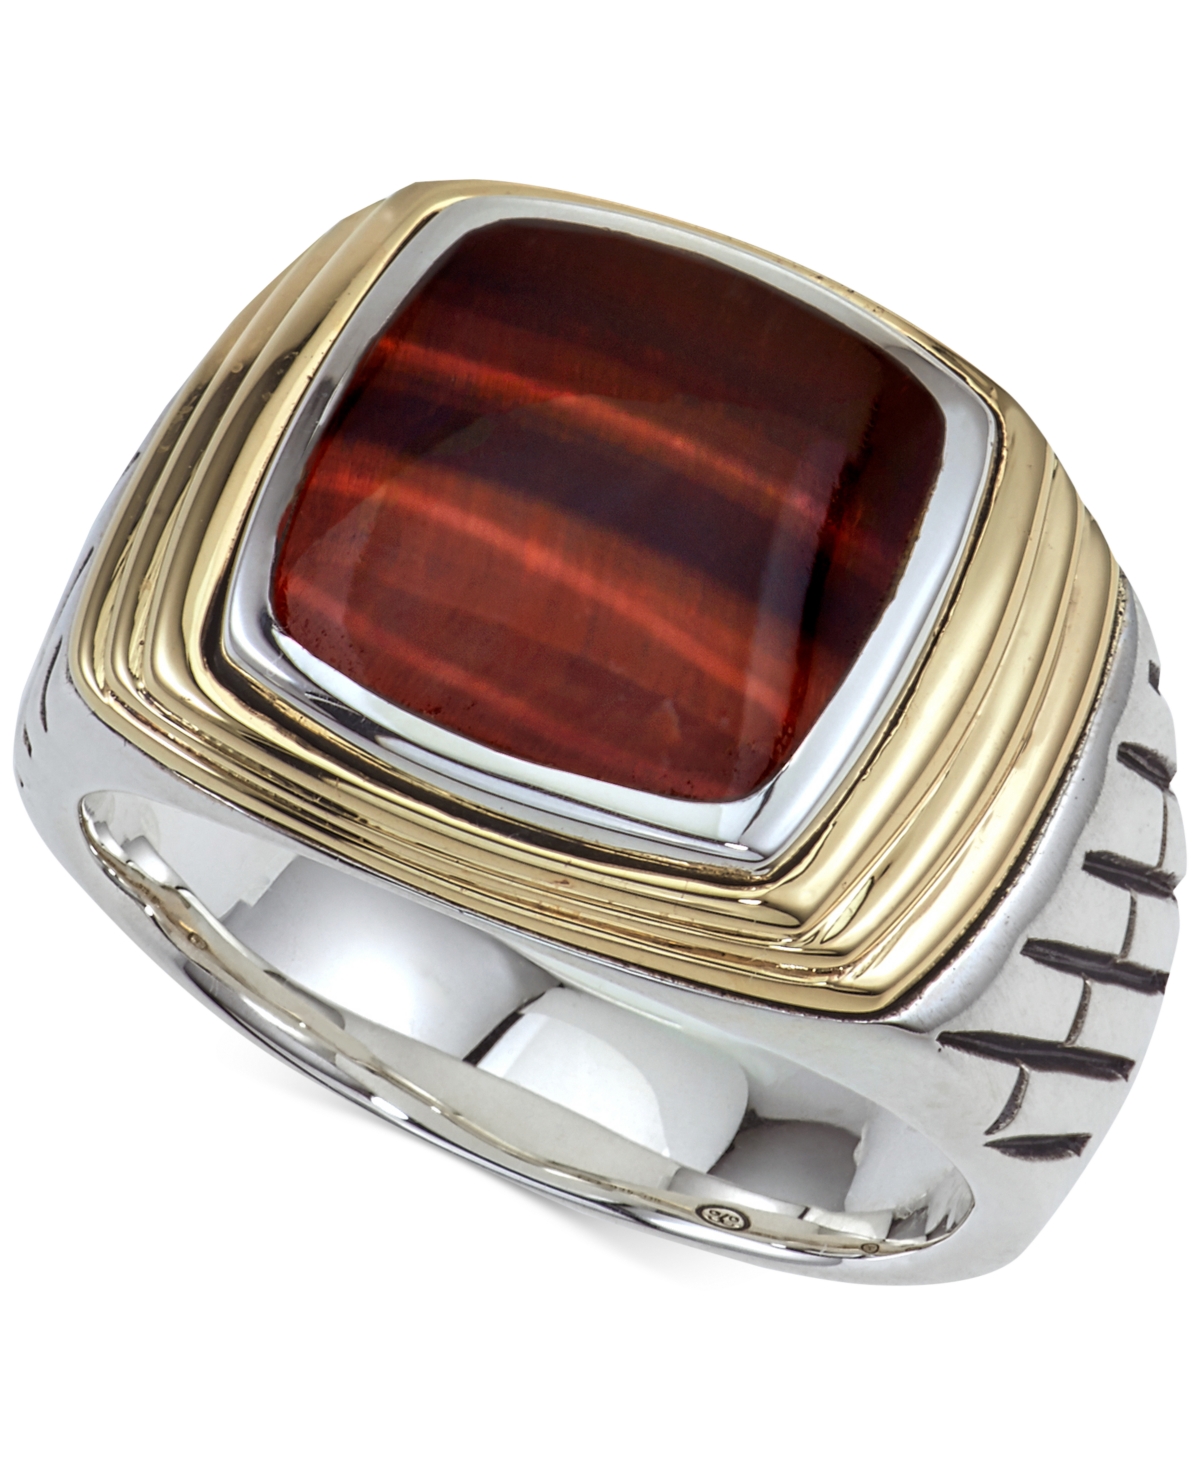 Tiger's Eye (12 x 10mm) Ring in Sterling Silver & 14k Gold, Created for Macy's - Silver